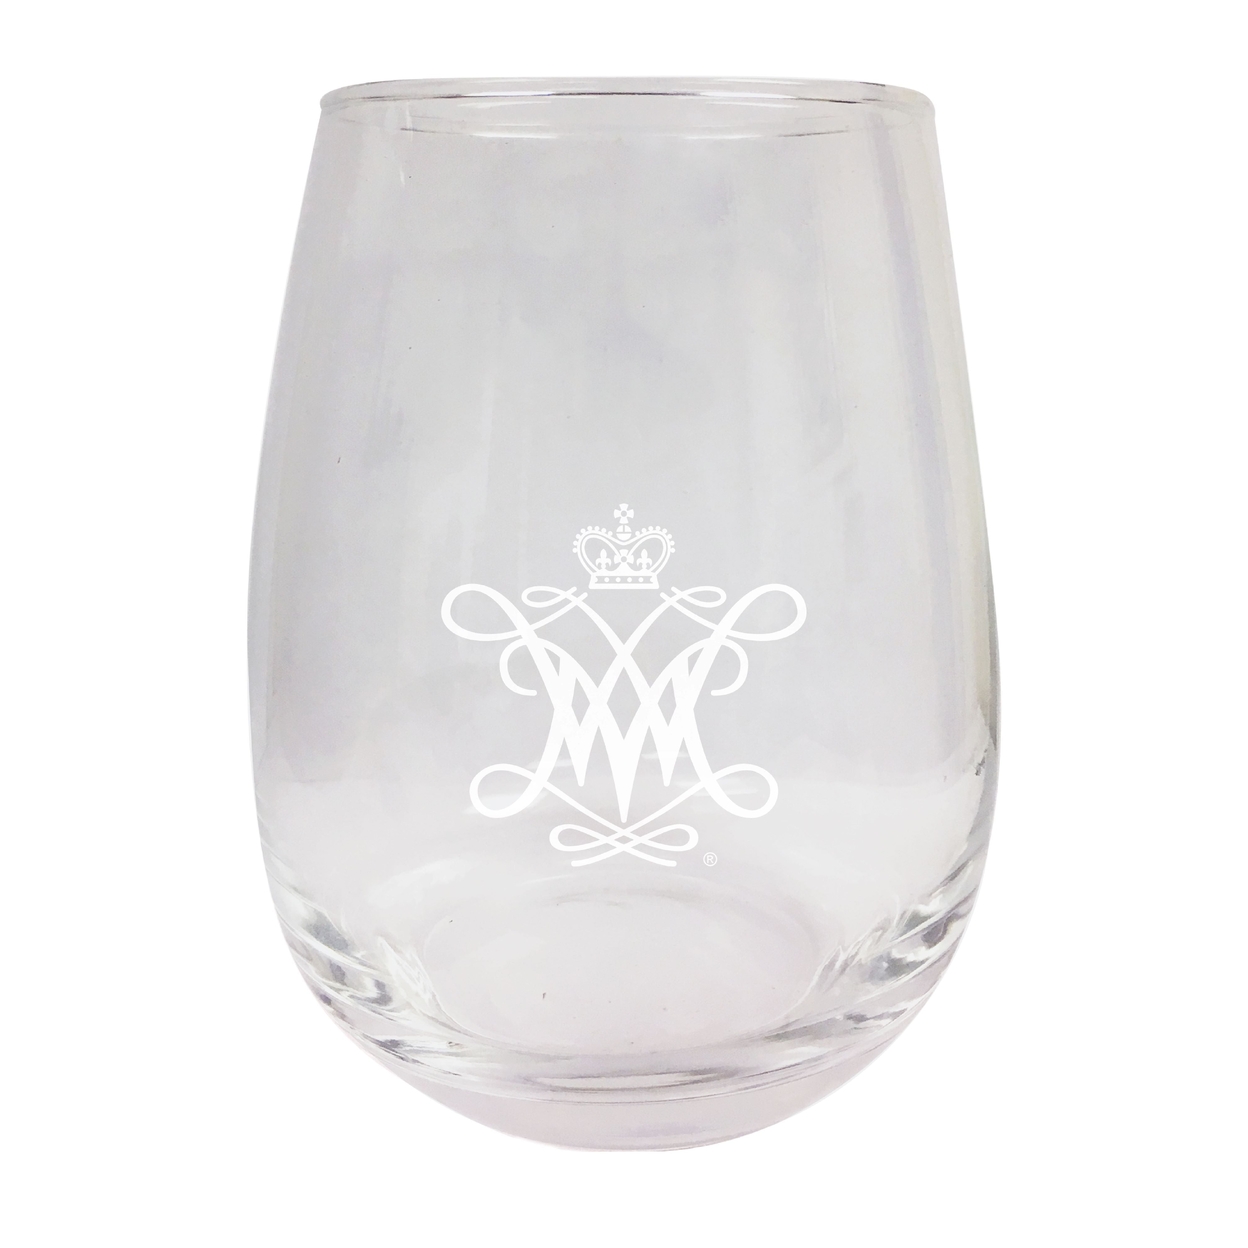 William And Mary Etched Stemless Wine Glass